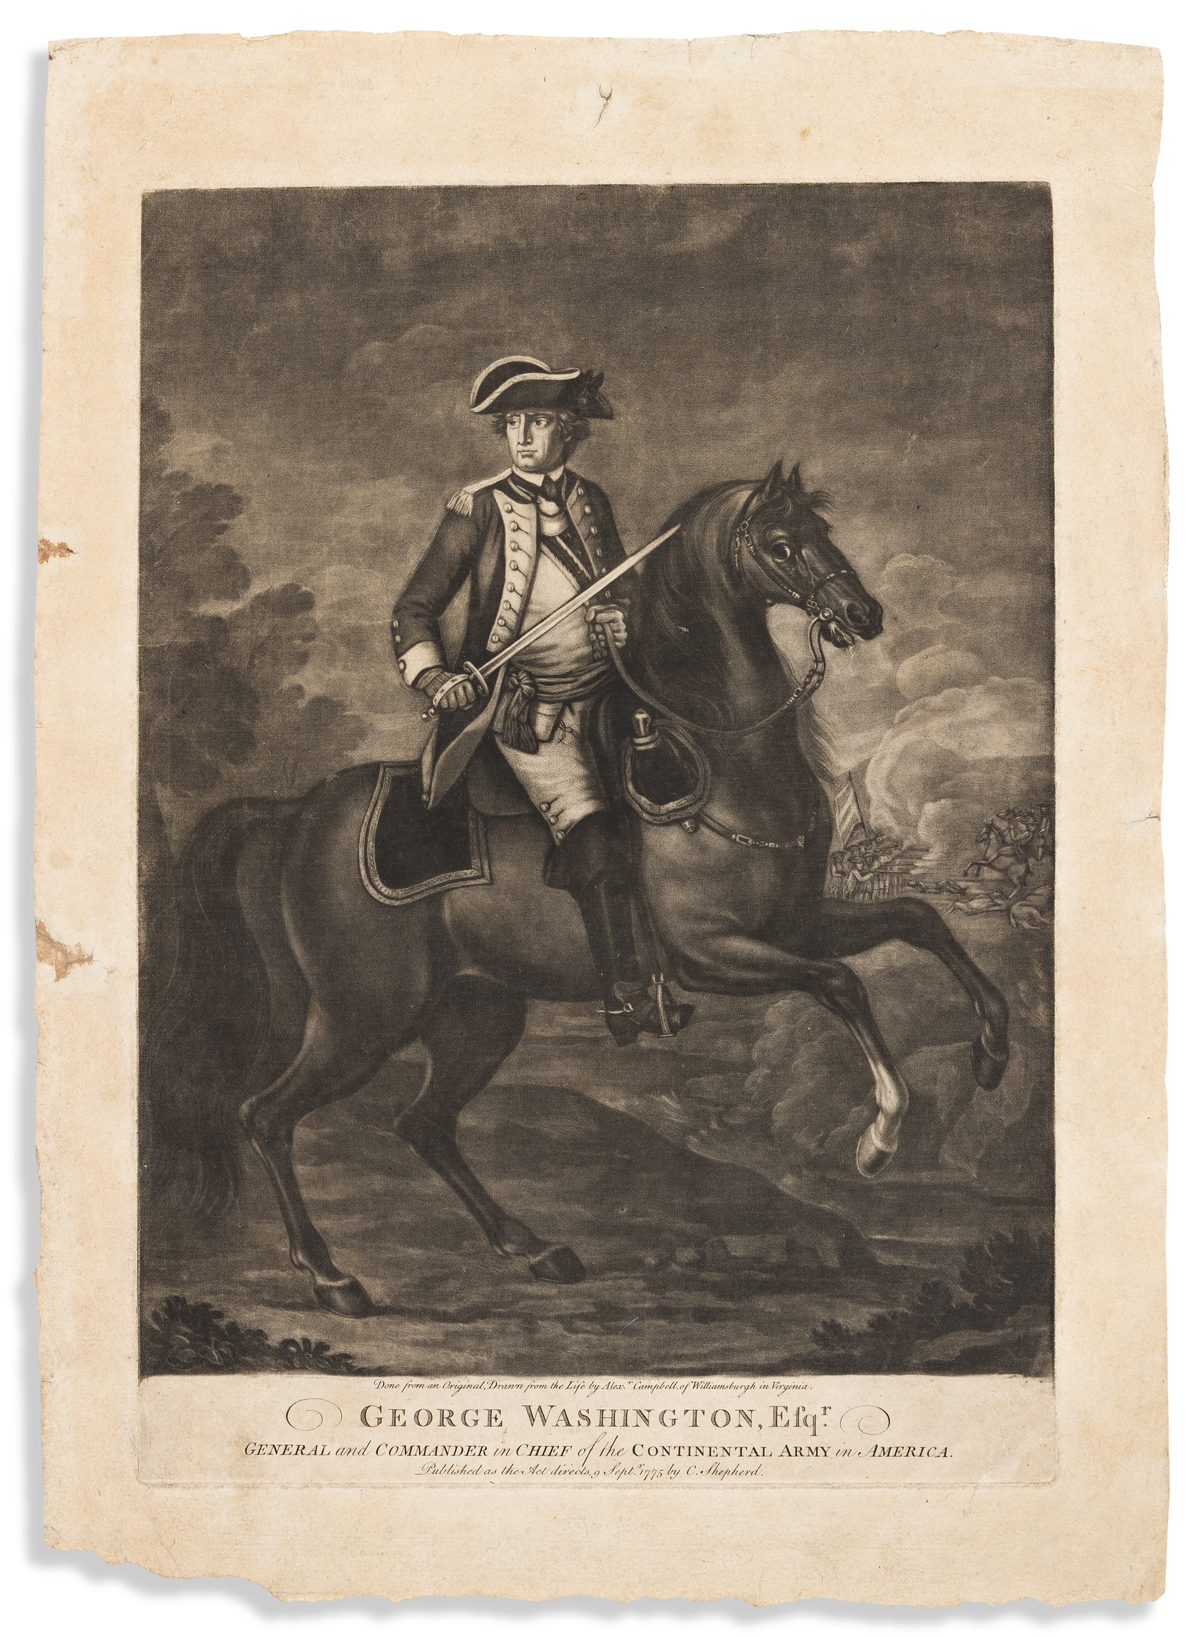 (WASHINGTON.) George Washington, Esqr., General and Commander in Chief of the Continental Army in America.